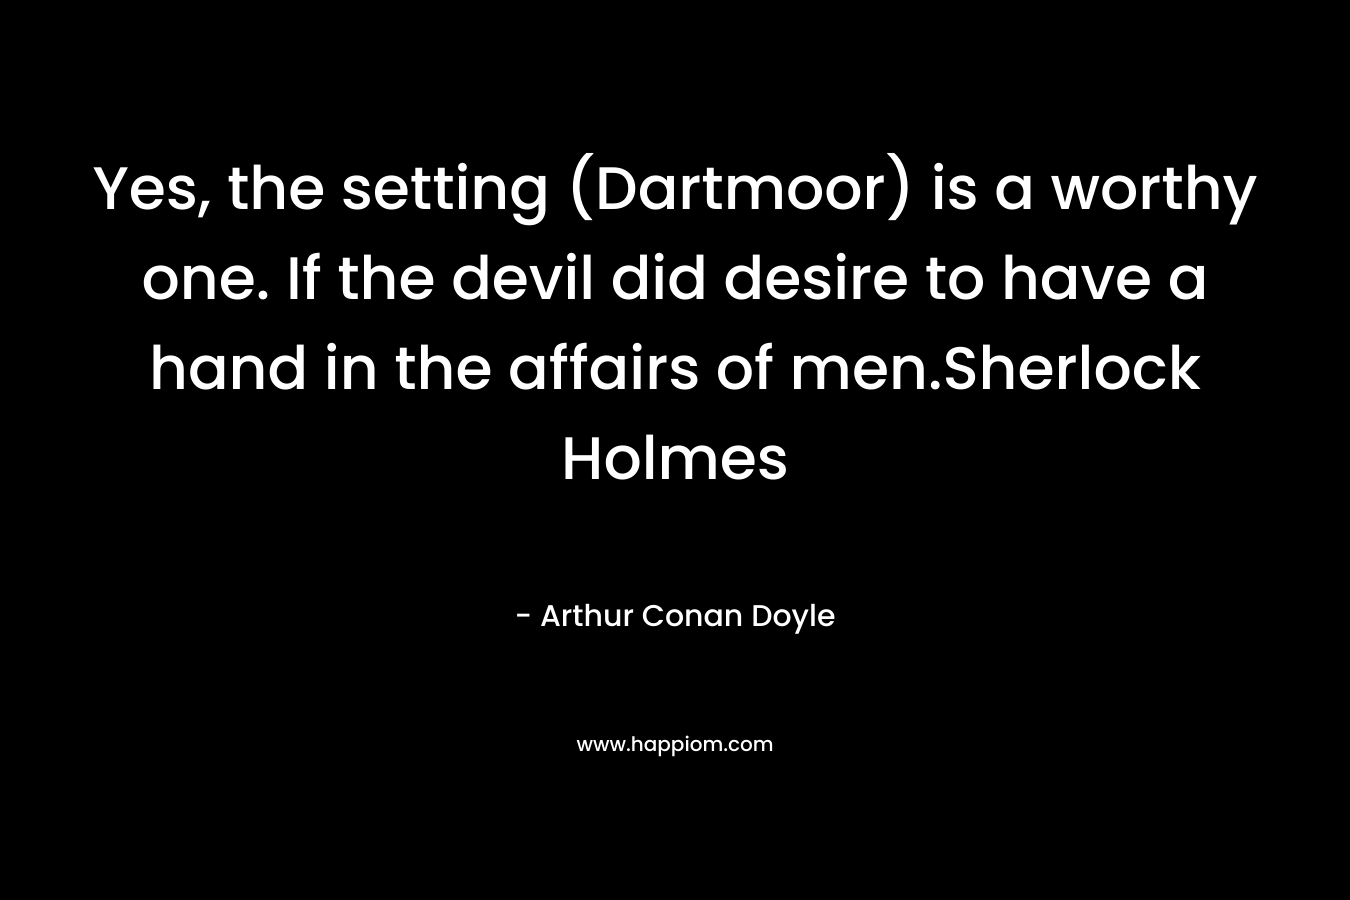 Yes, the setting (Dartmoor) is a worthy one. If the devil did desire to have a hand in the affairs of men.Sherlock Holmes